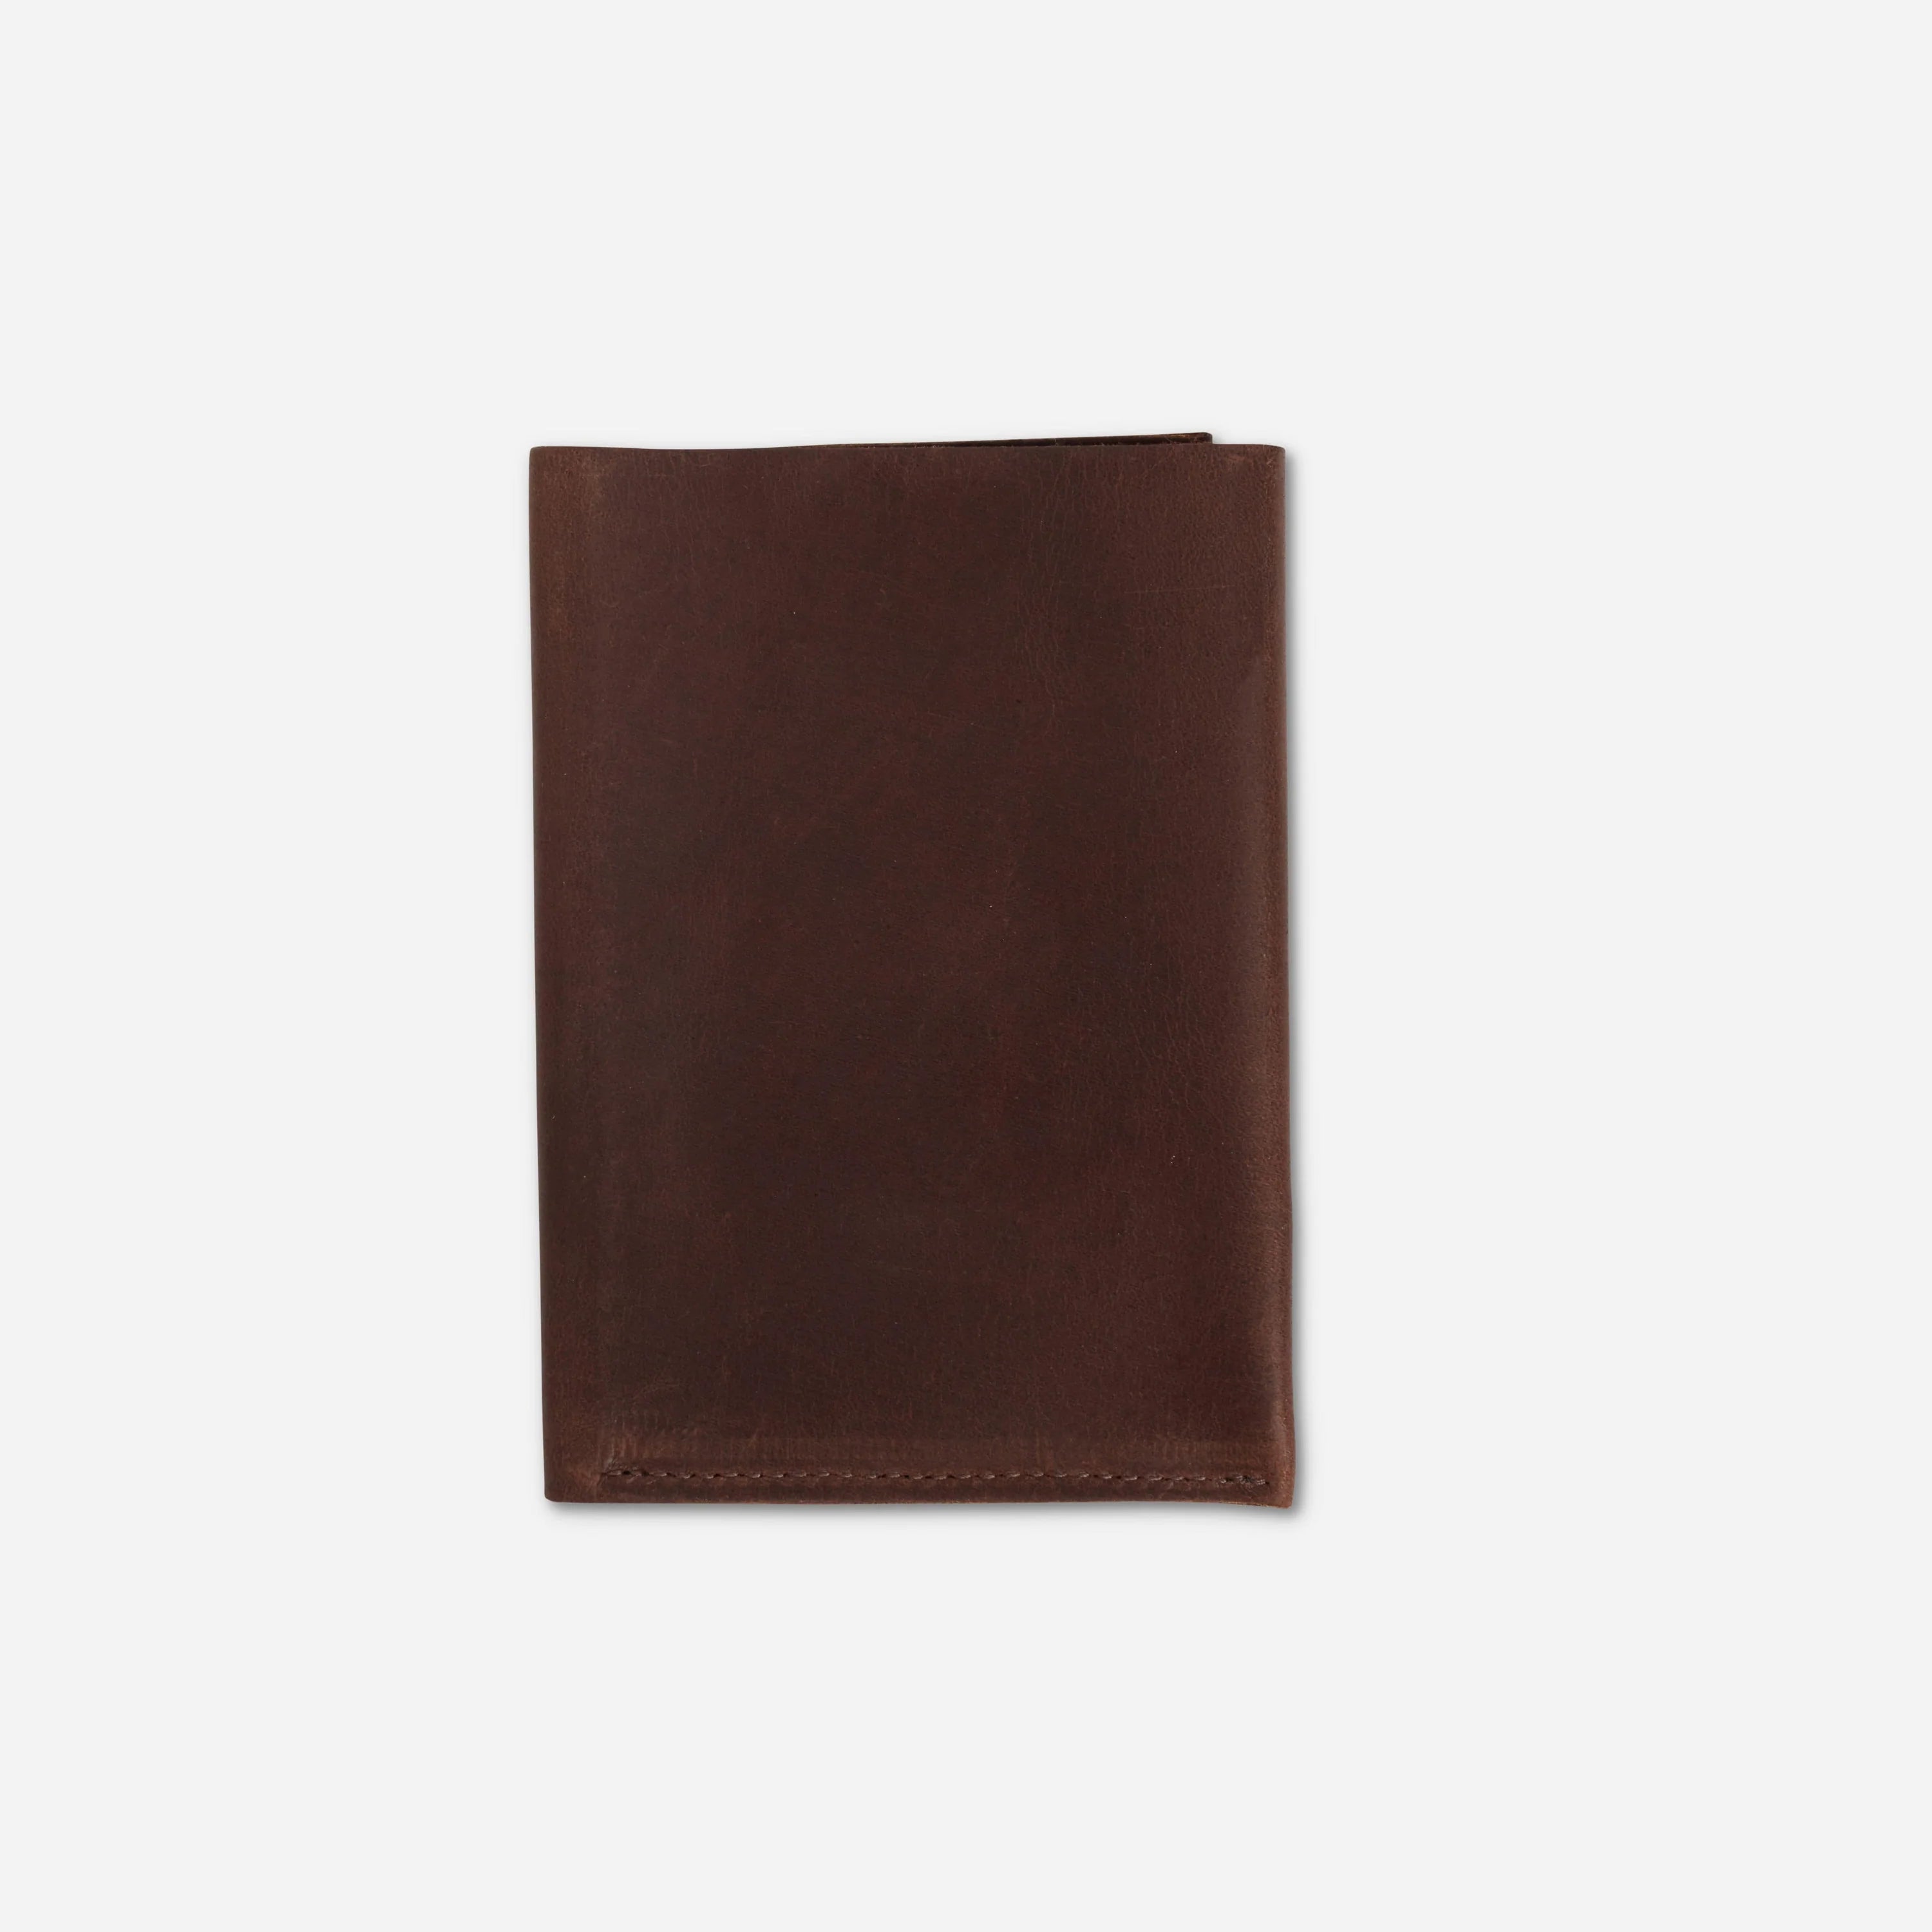 Parker Clay: Ethical Leather Goods  (Min 24)